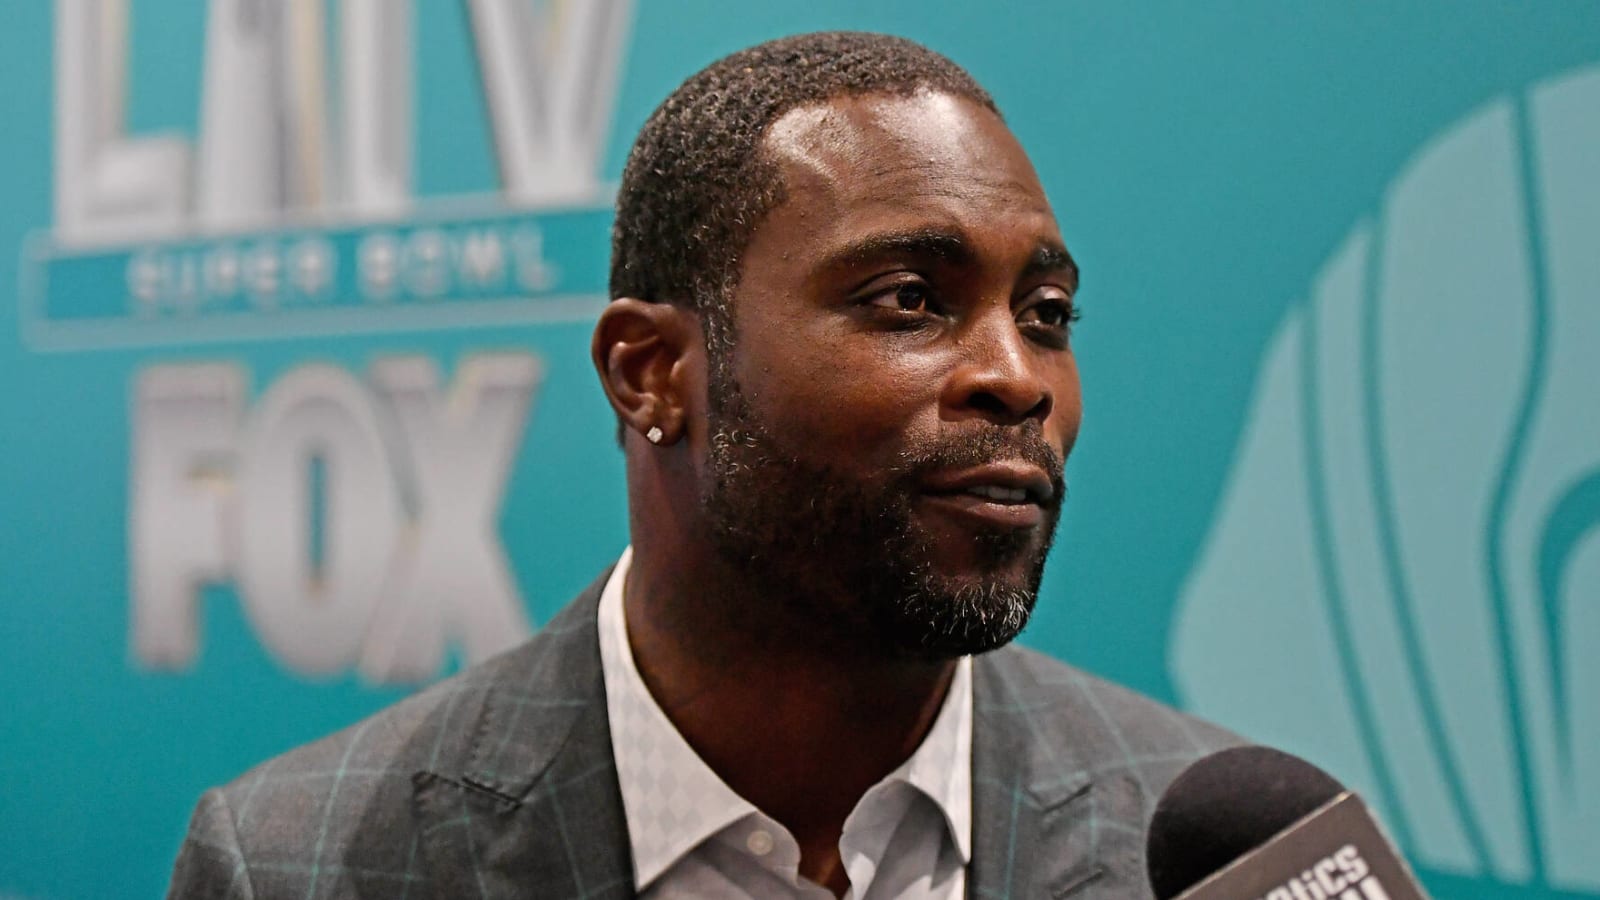 Michael Vick shares admission about scandal